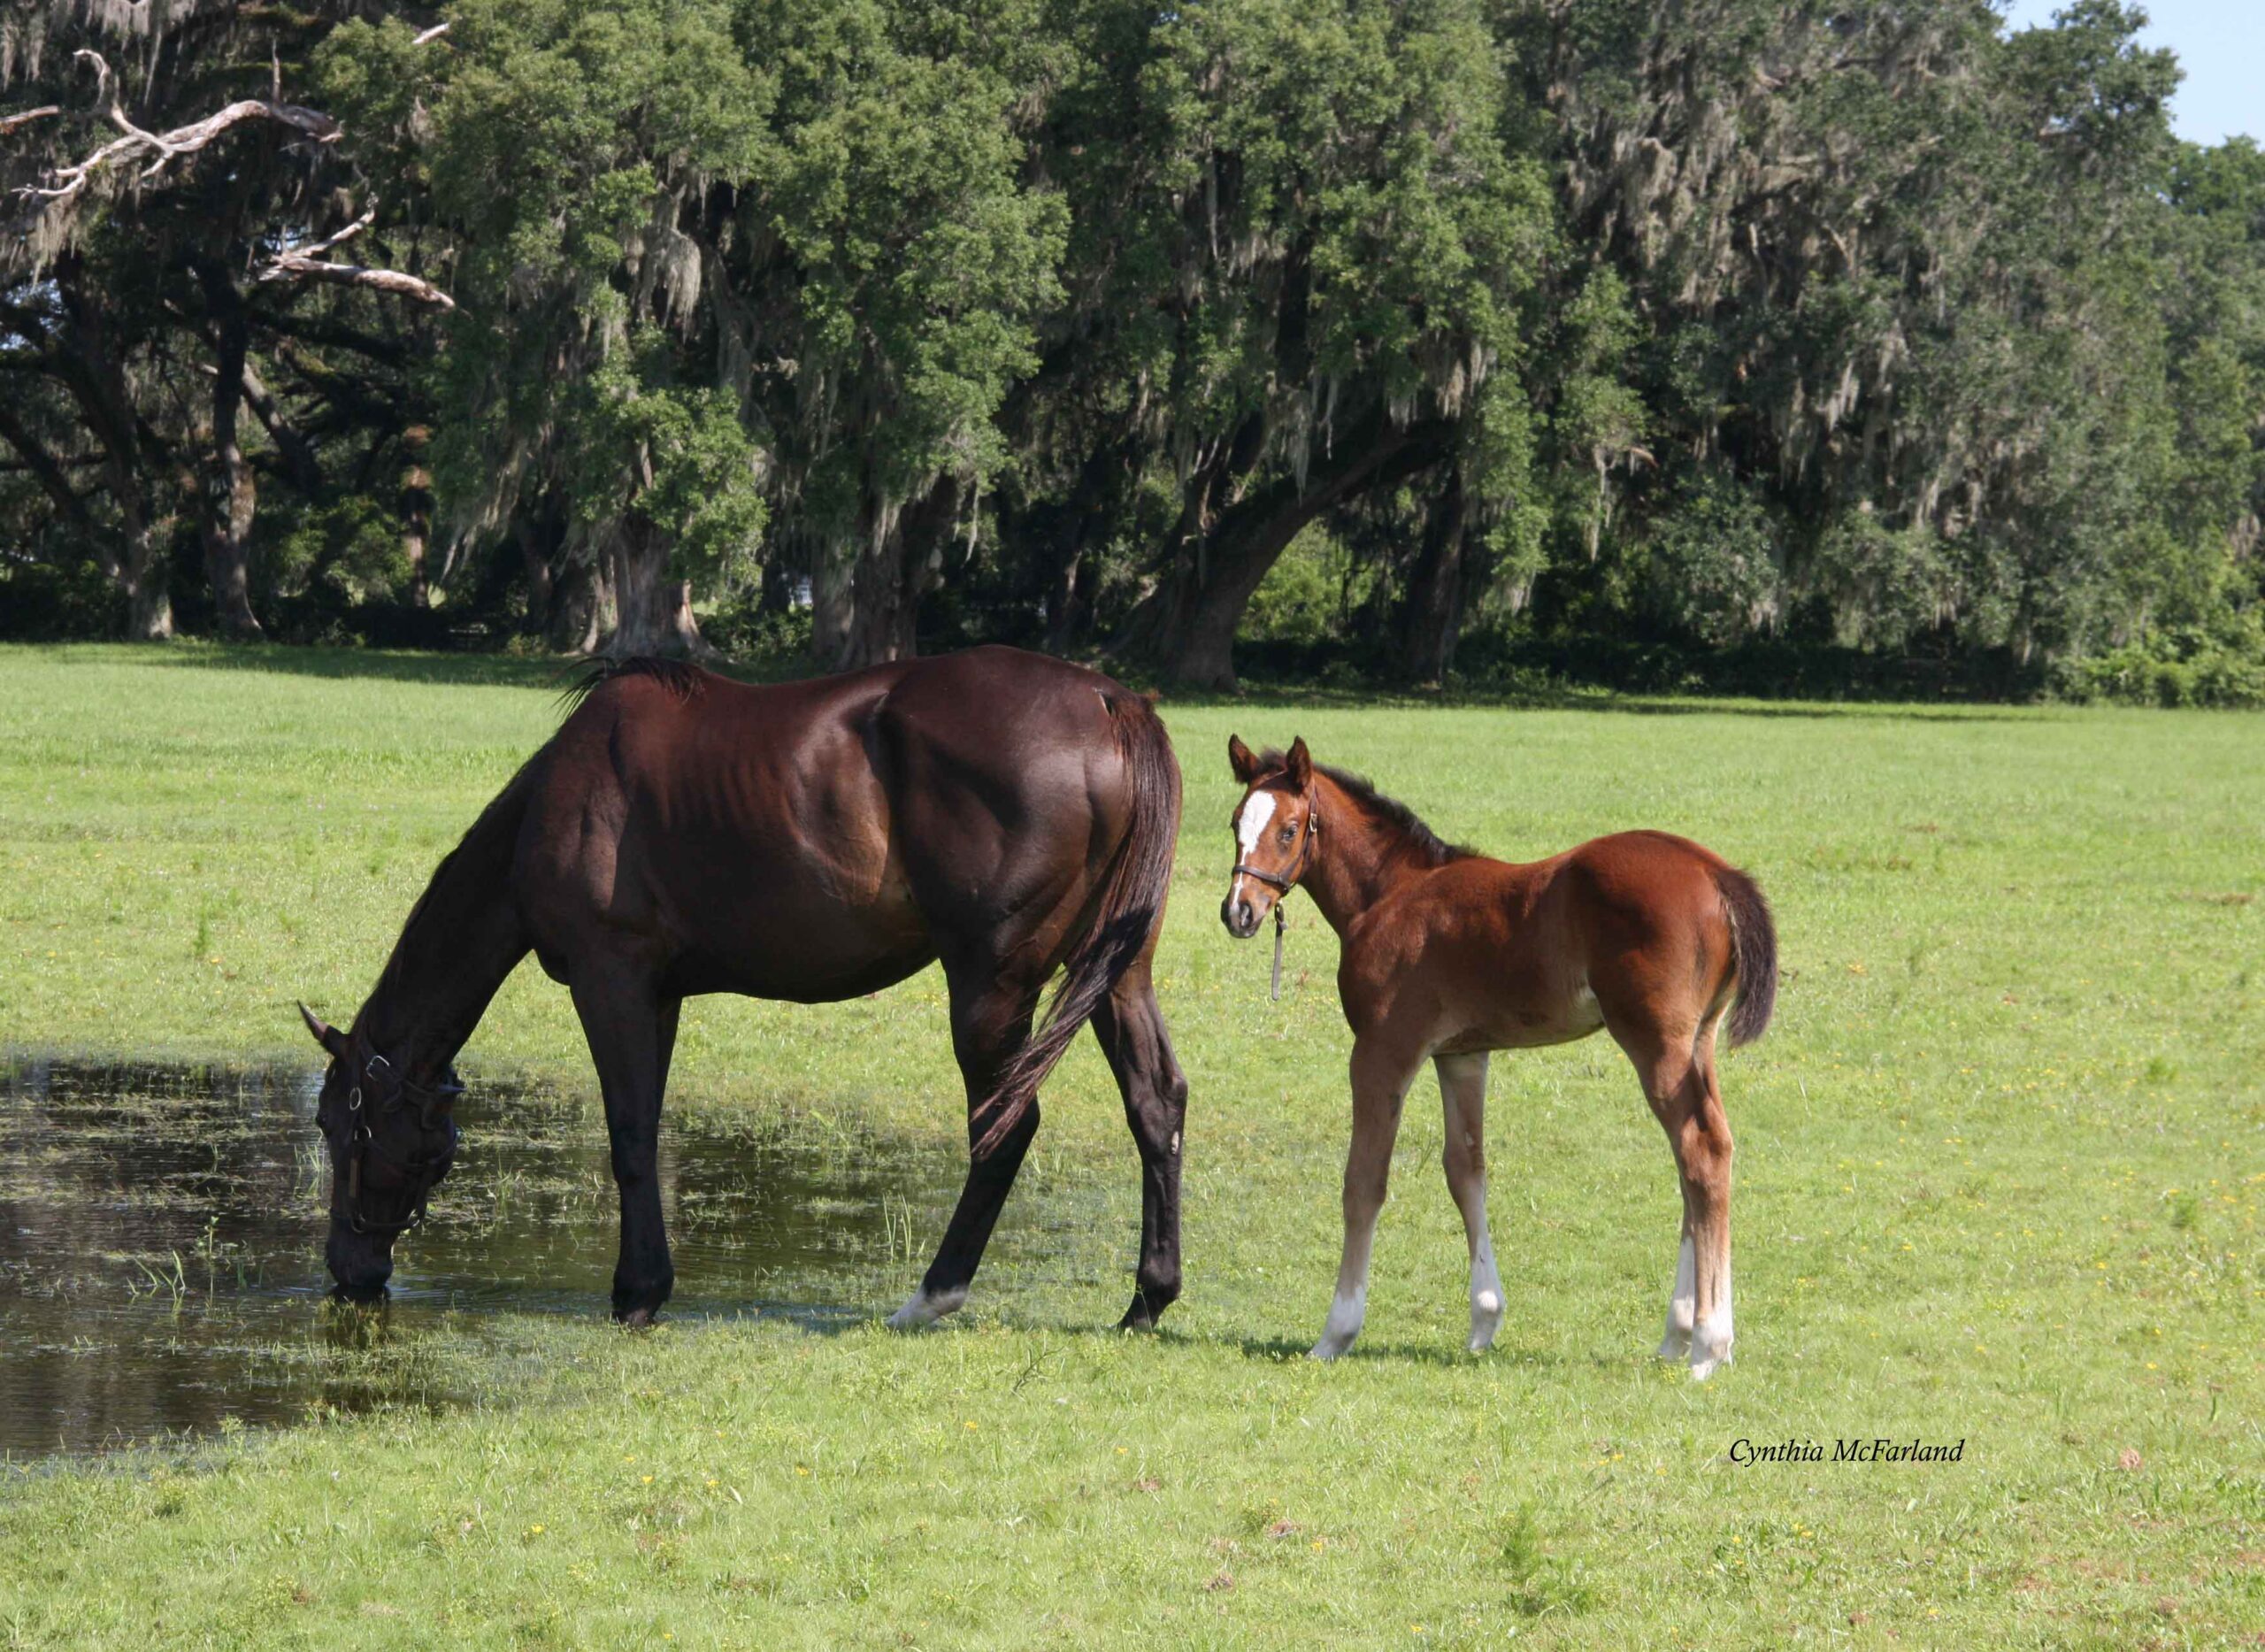 A mare and foal in a good pasture.